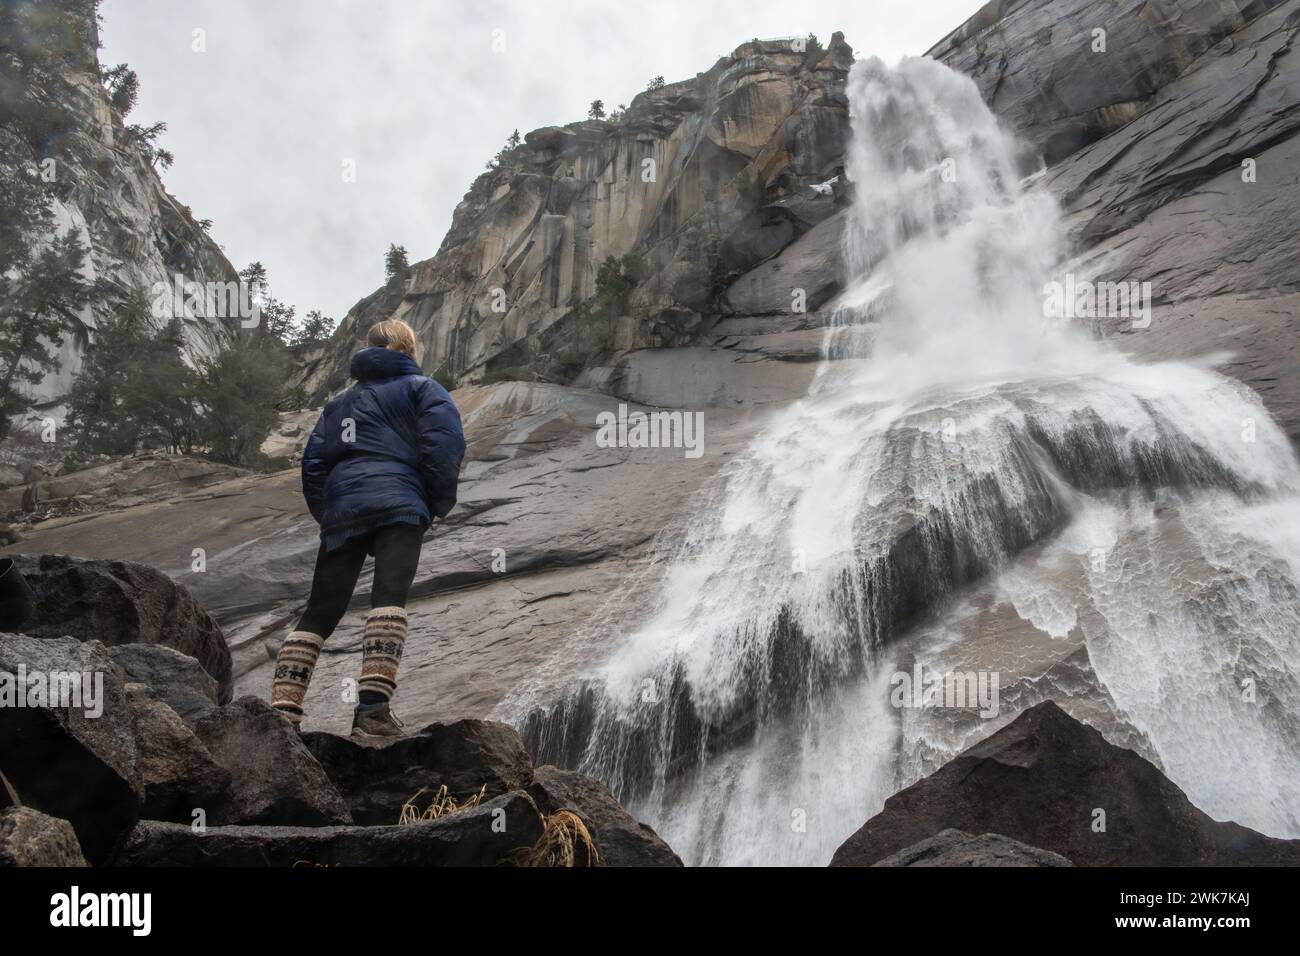 A female hiker stands underneath a cascading waterfall in Yosemite National Park in the Sierra Nevada Mountains of California, USA. Stock Photo